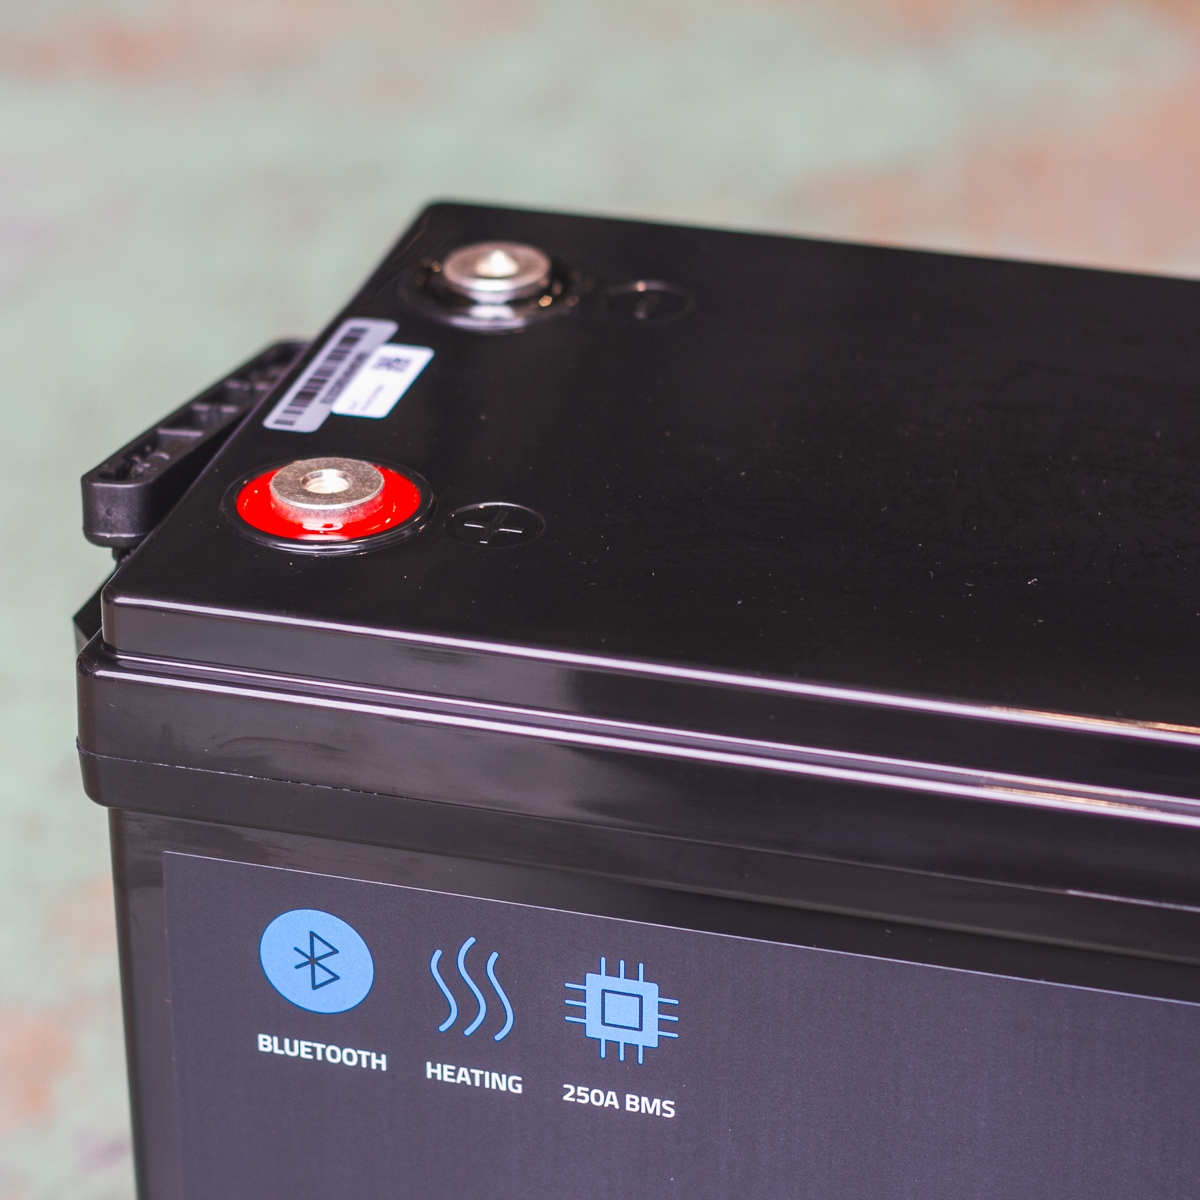 Close-up of a black battery with Bluetooth, heating, and 250A BMS symbols on its side; this impressive unit is the Fogstar Drift 230Ah - 12V lithium leisure battery.